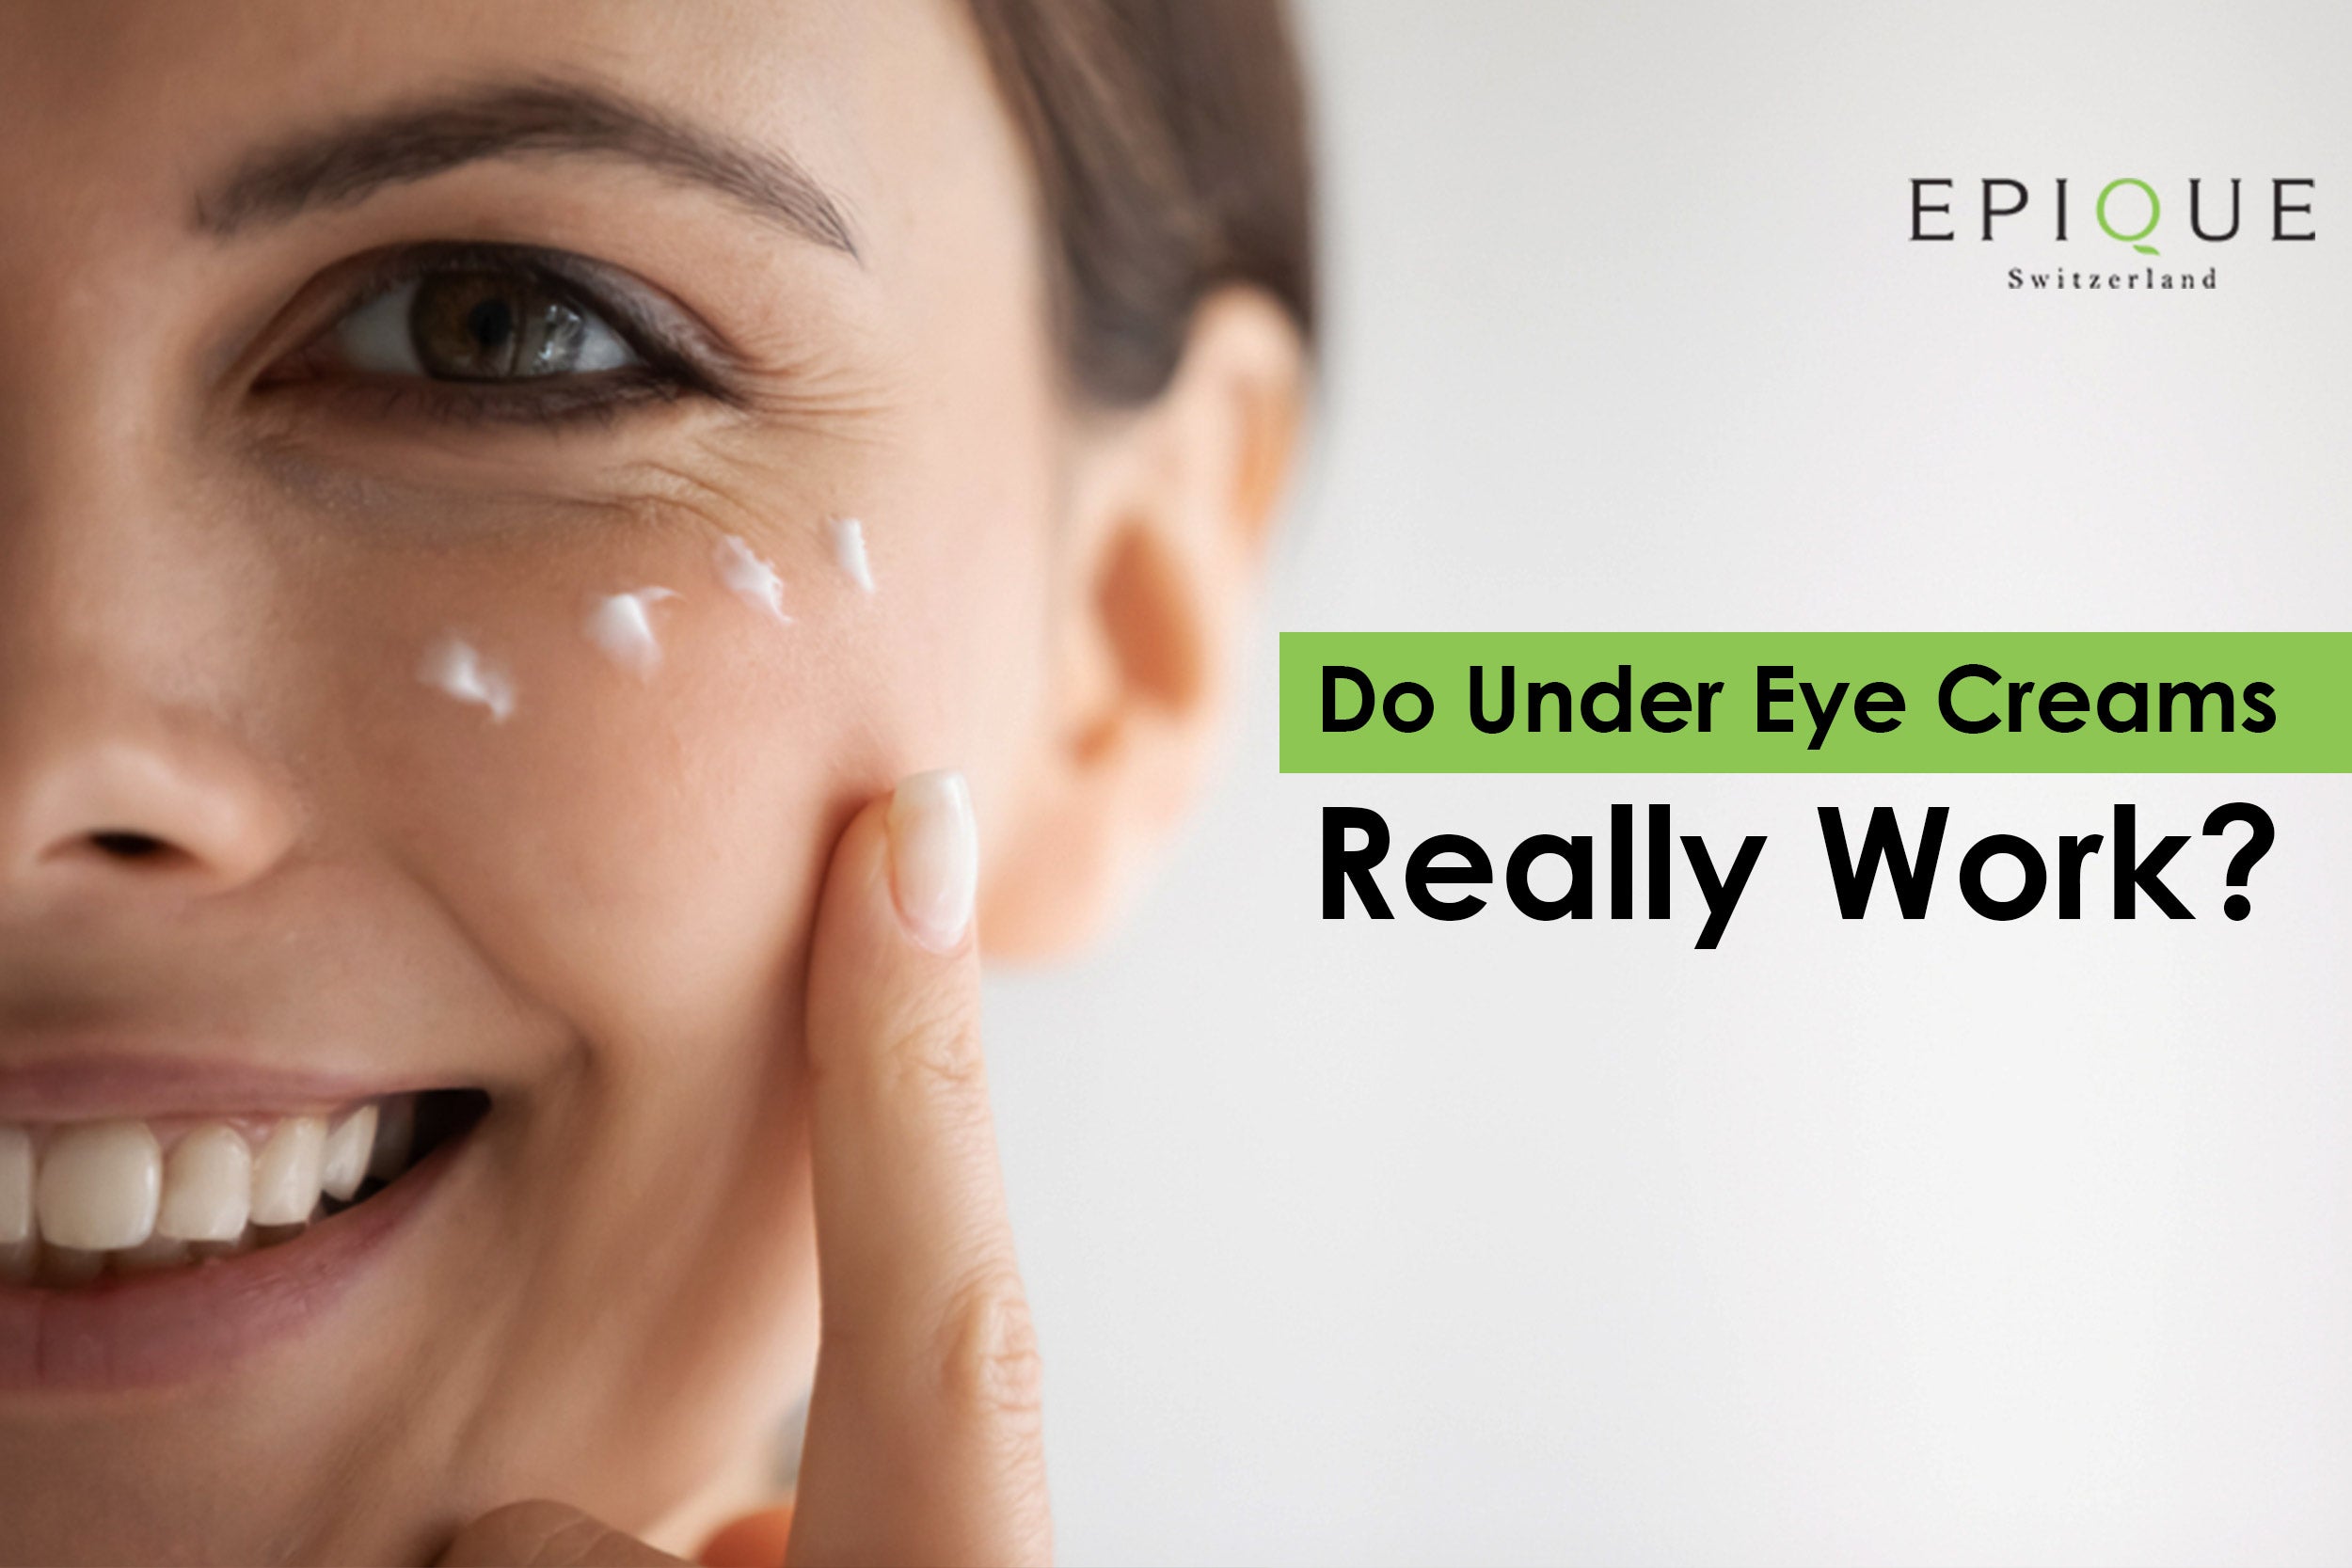 Does Under Eye Cream Really Work on Dark Circles and Wrinkles?